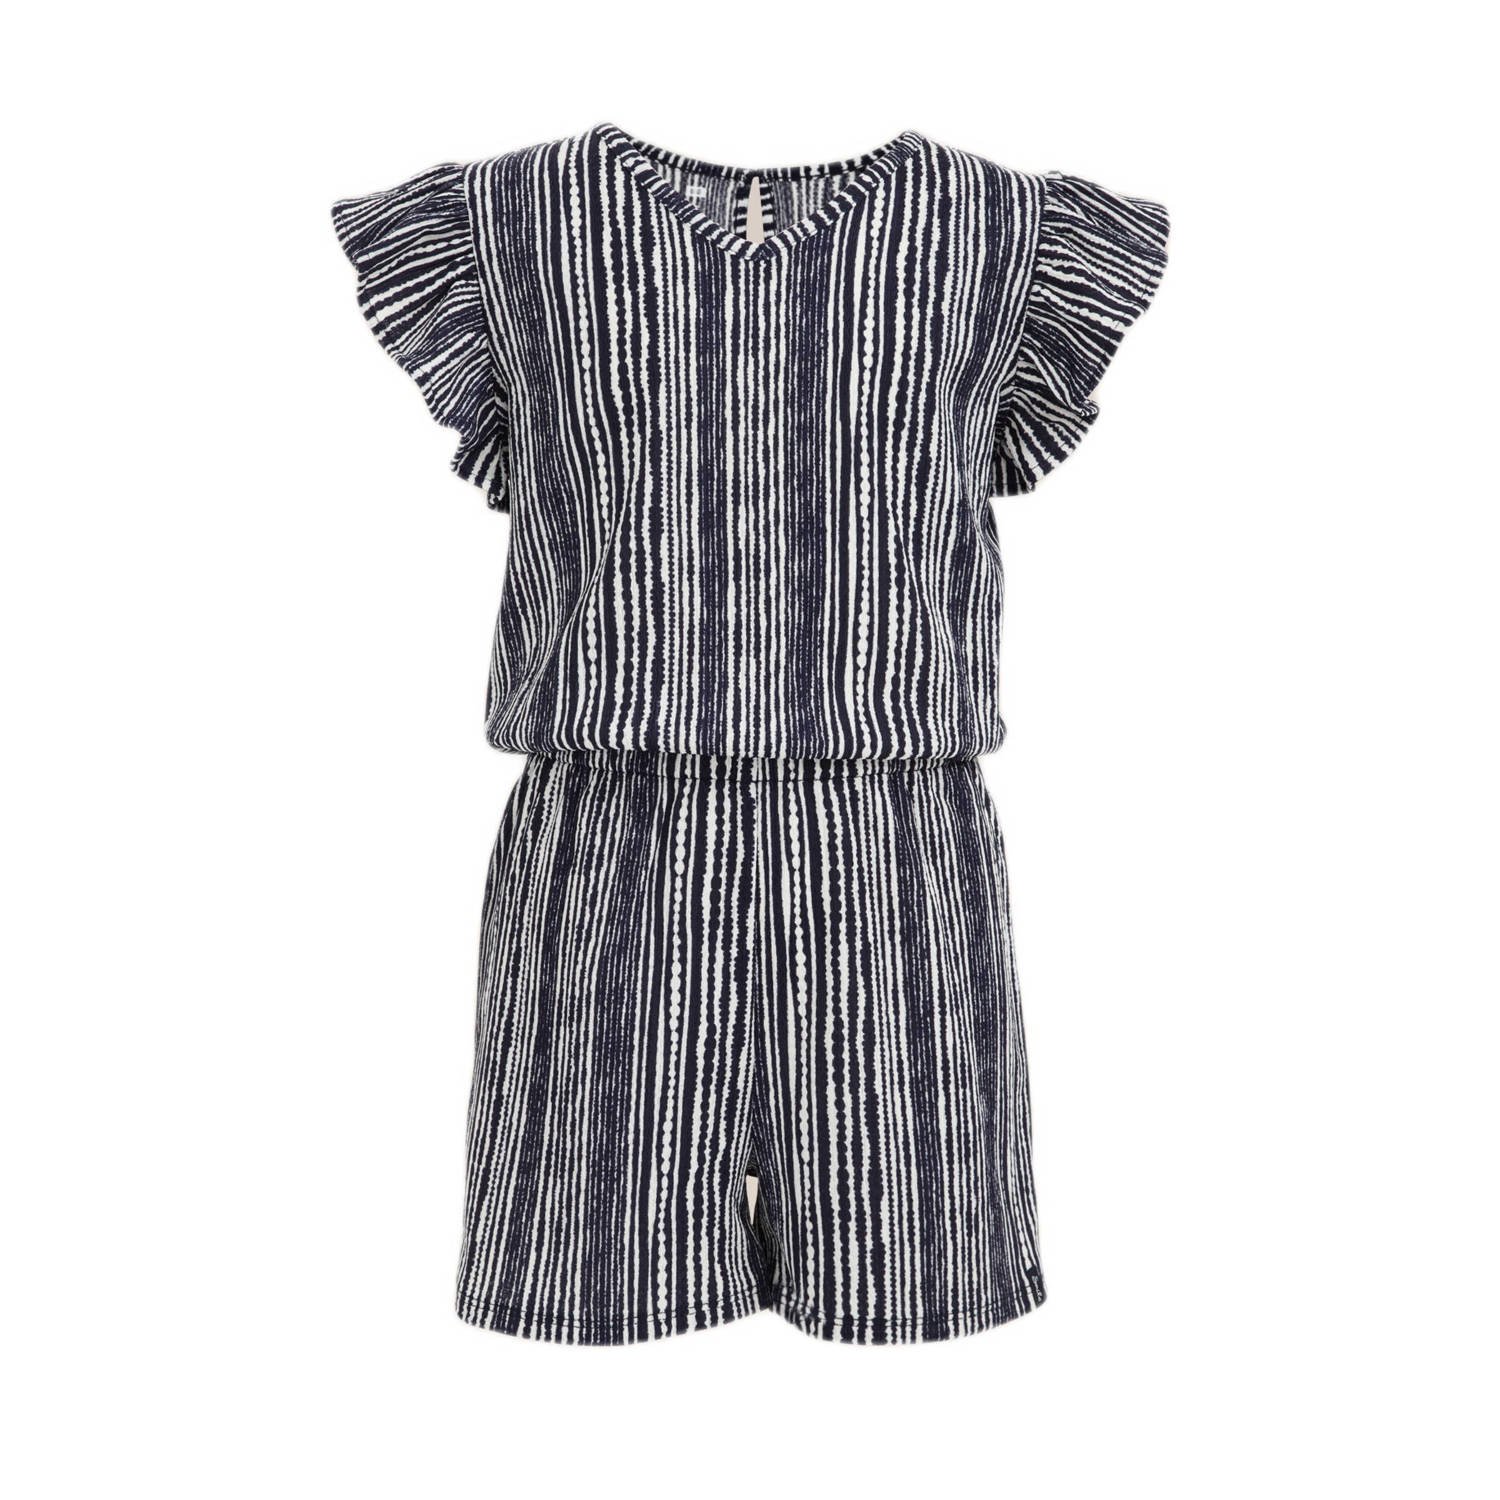 WE Fashion playsuit met all over print donkerblauw wit Meisjes Polyester V-hals 122 128